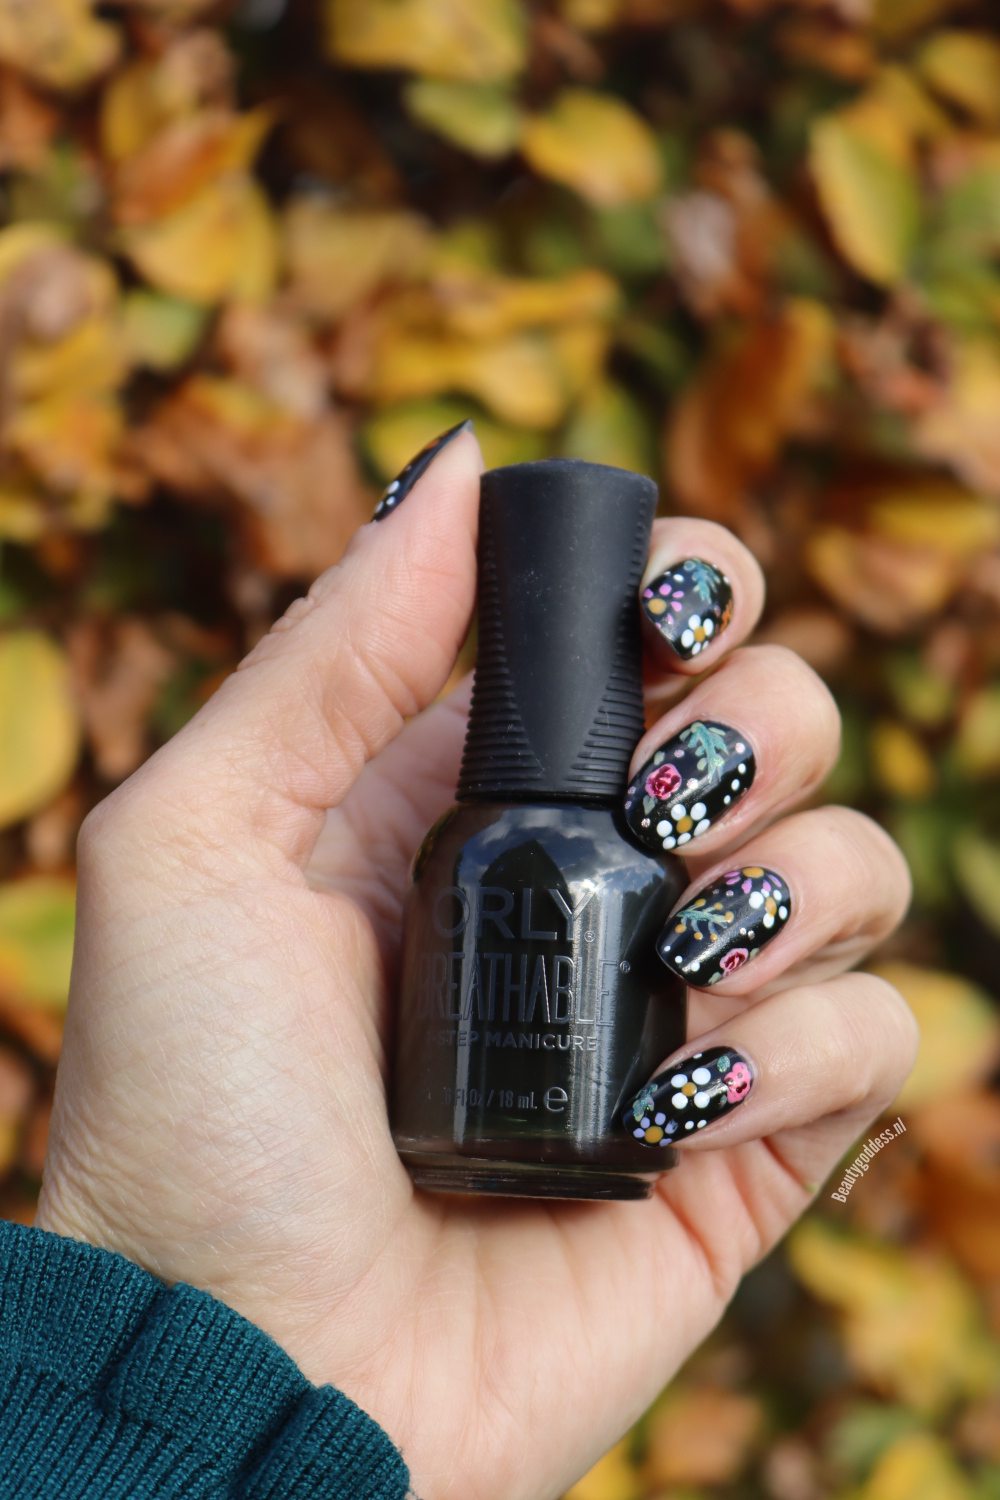 ORLY spice it up collection